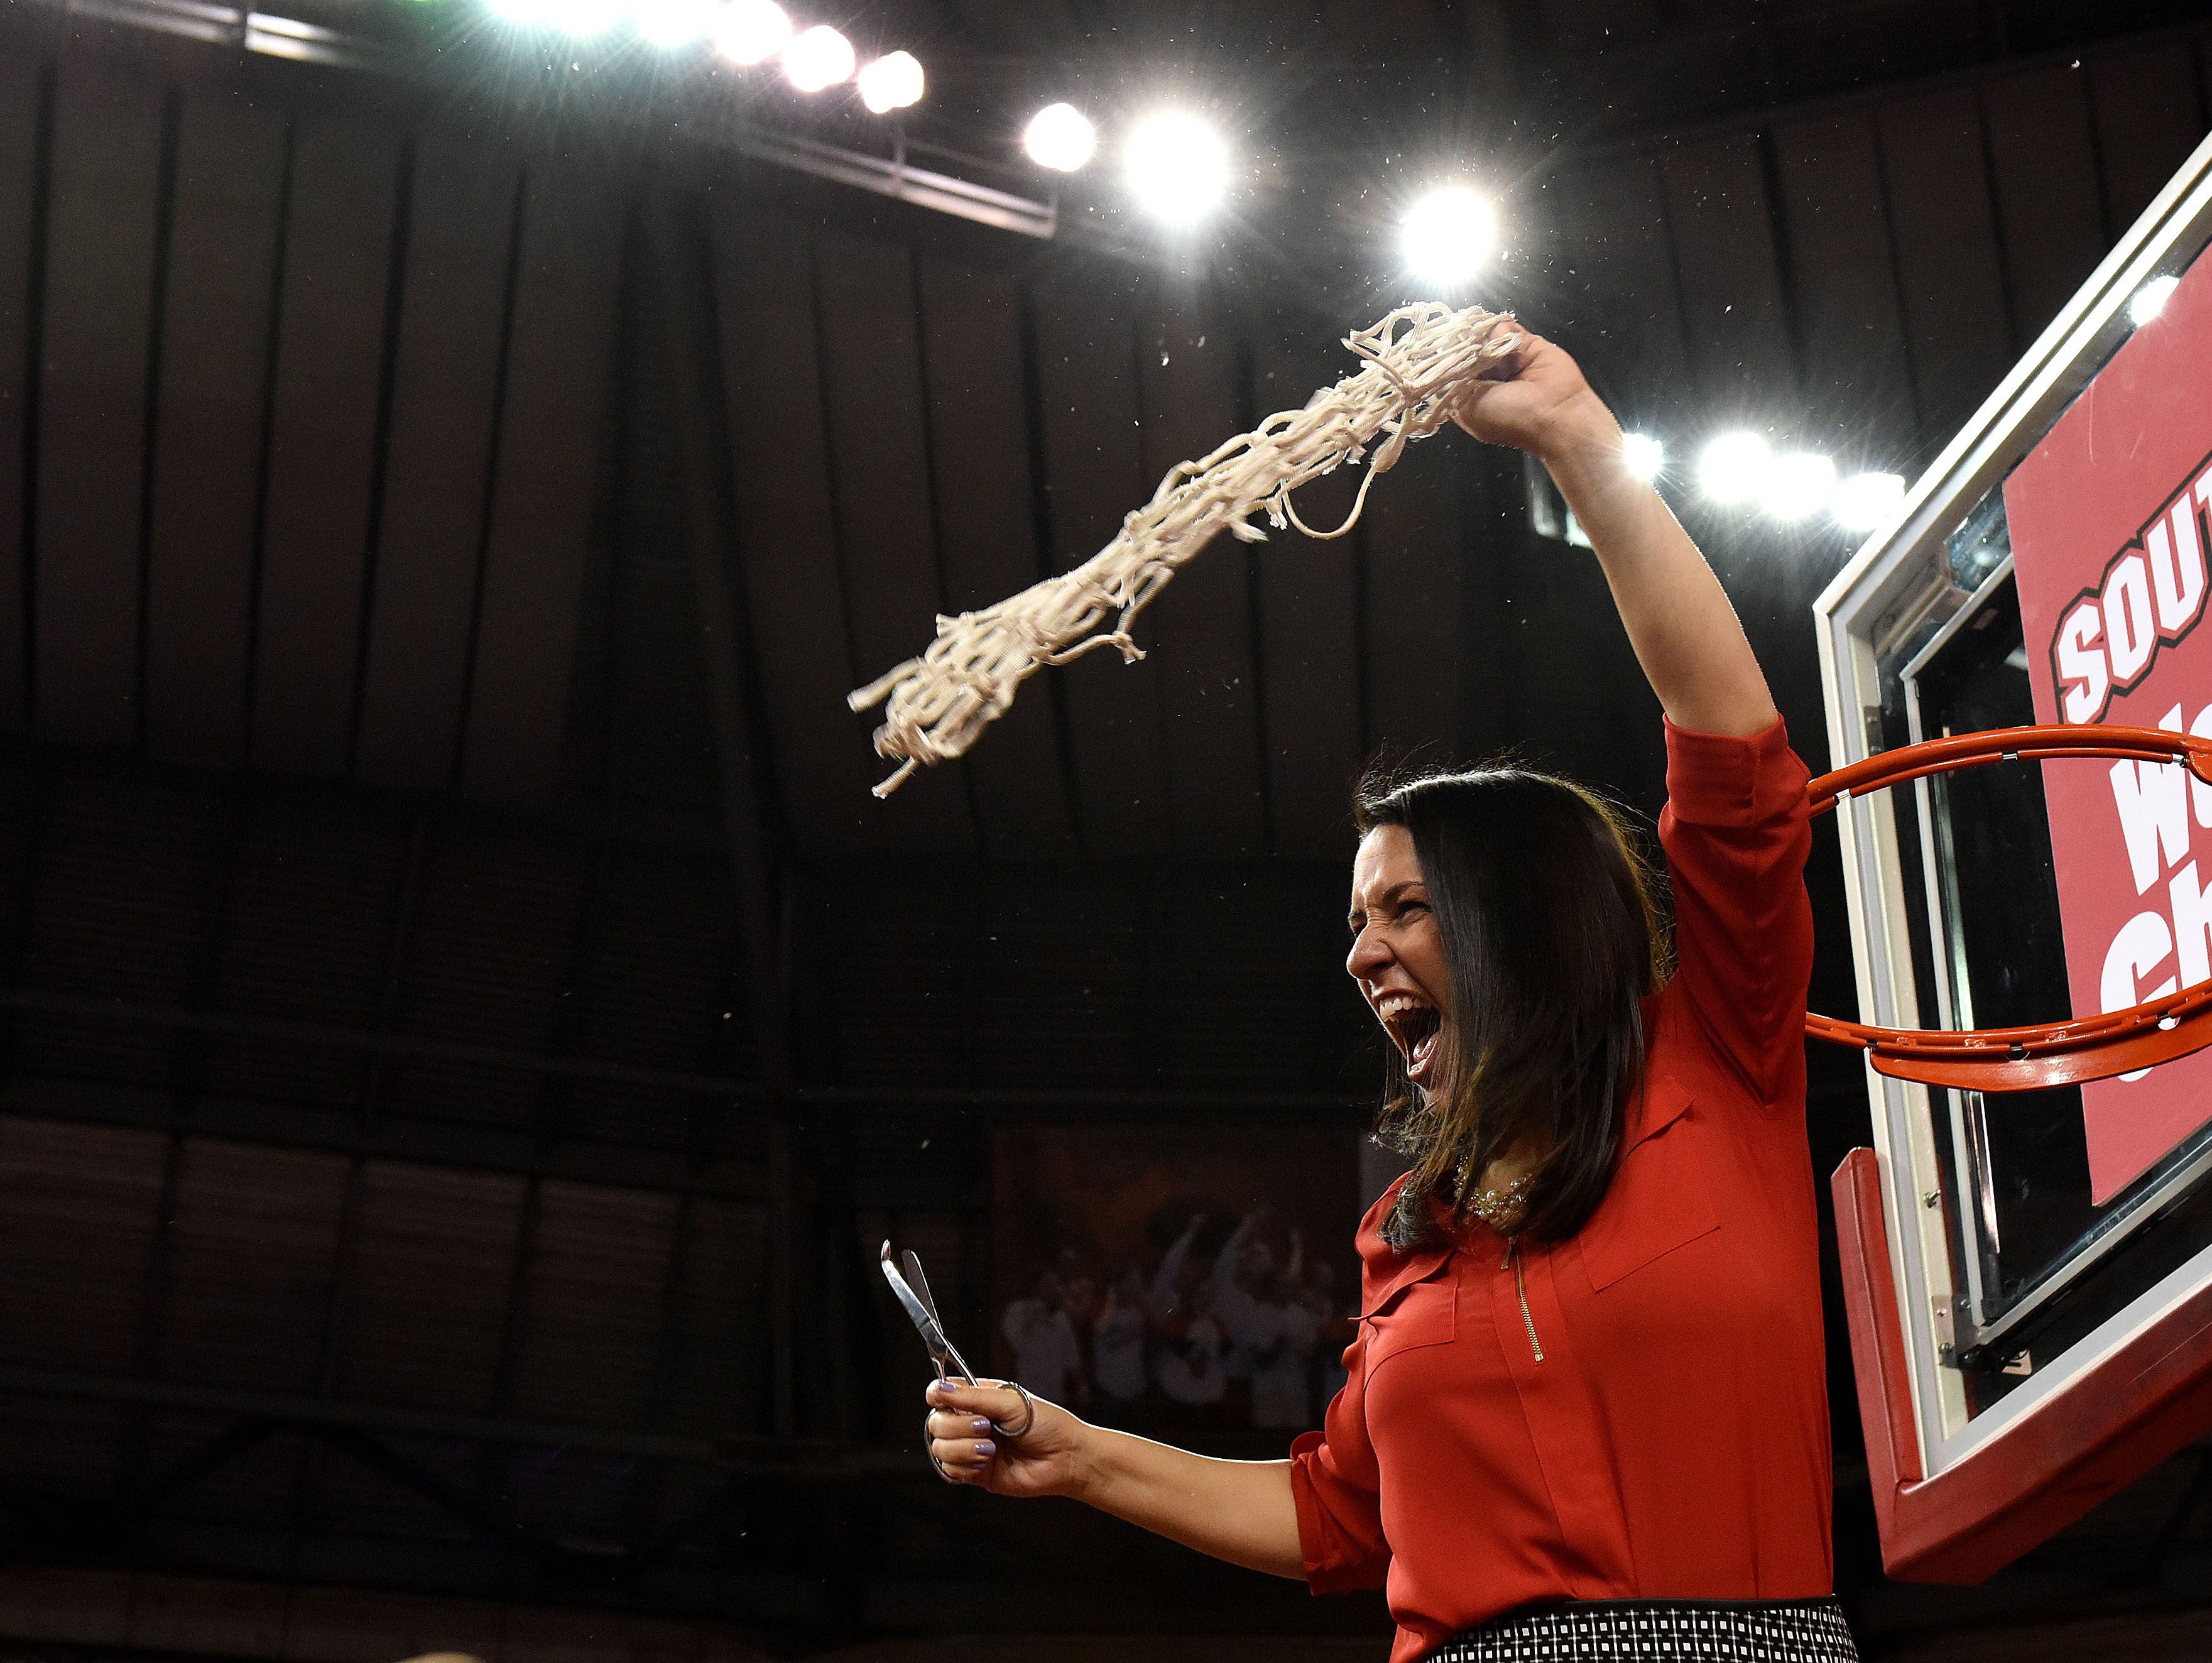 USD's Amy Williams celebrates after her team wins the WNIT championship over FGCU at the DakotaDome in Vermillion, S.D., Saturday, April 2, 2016.